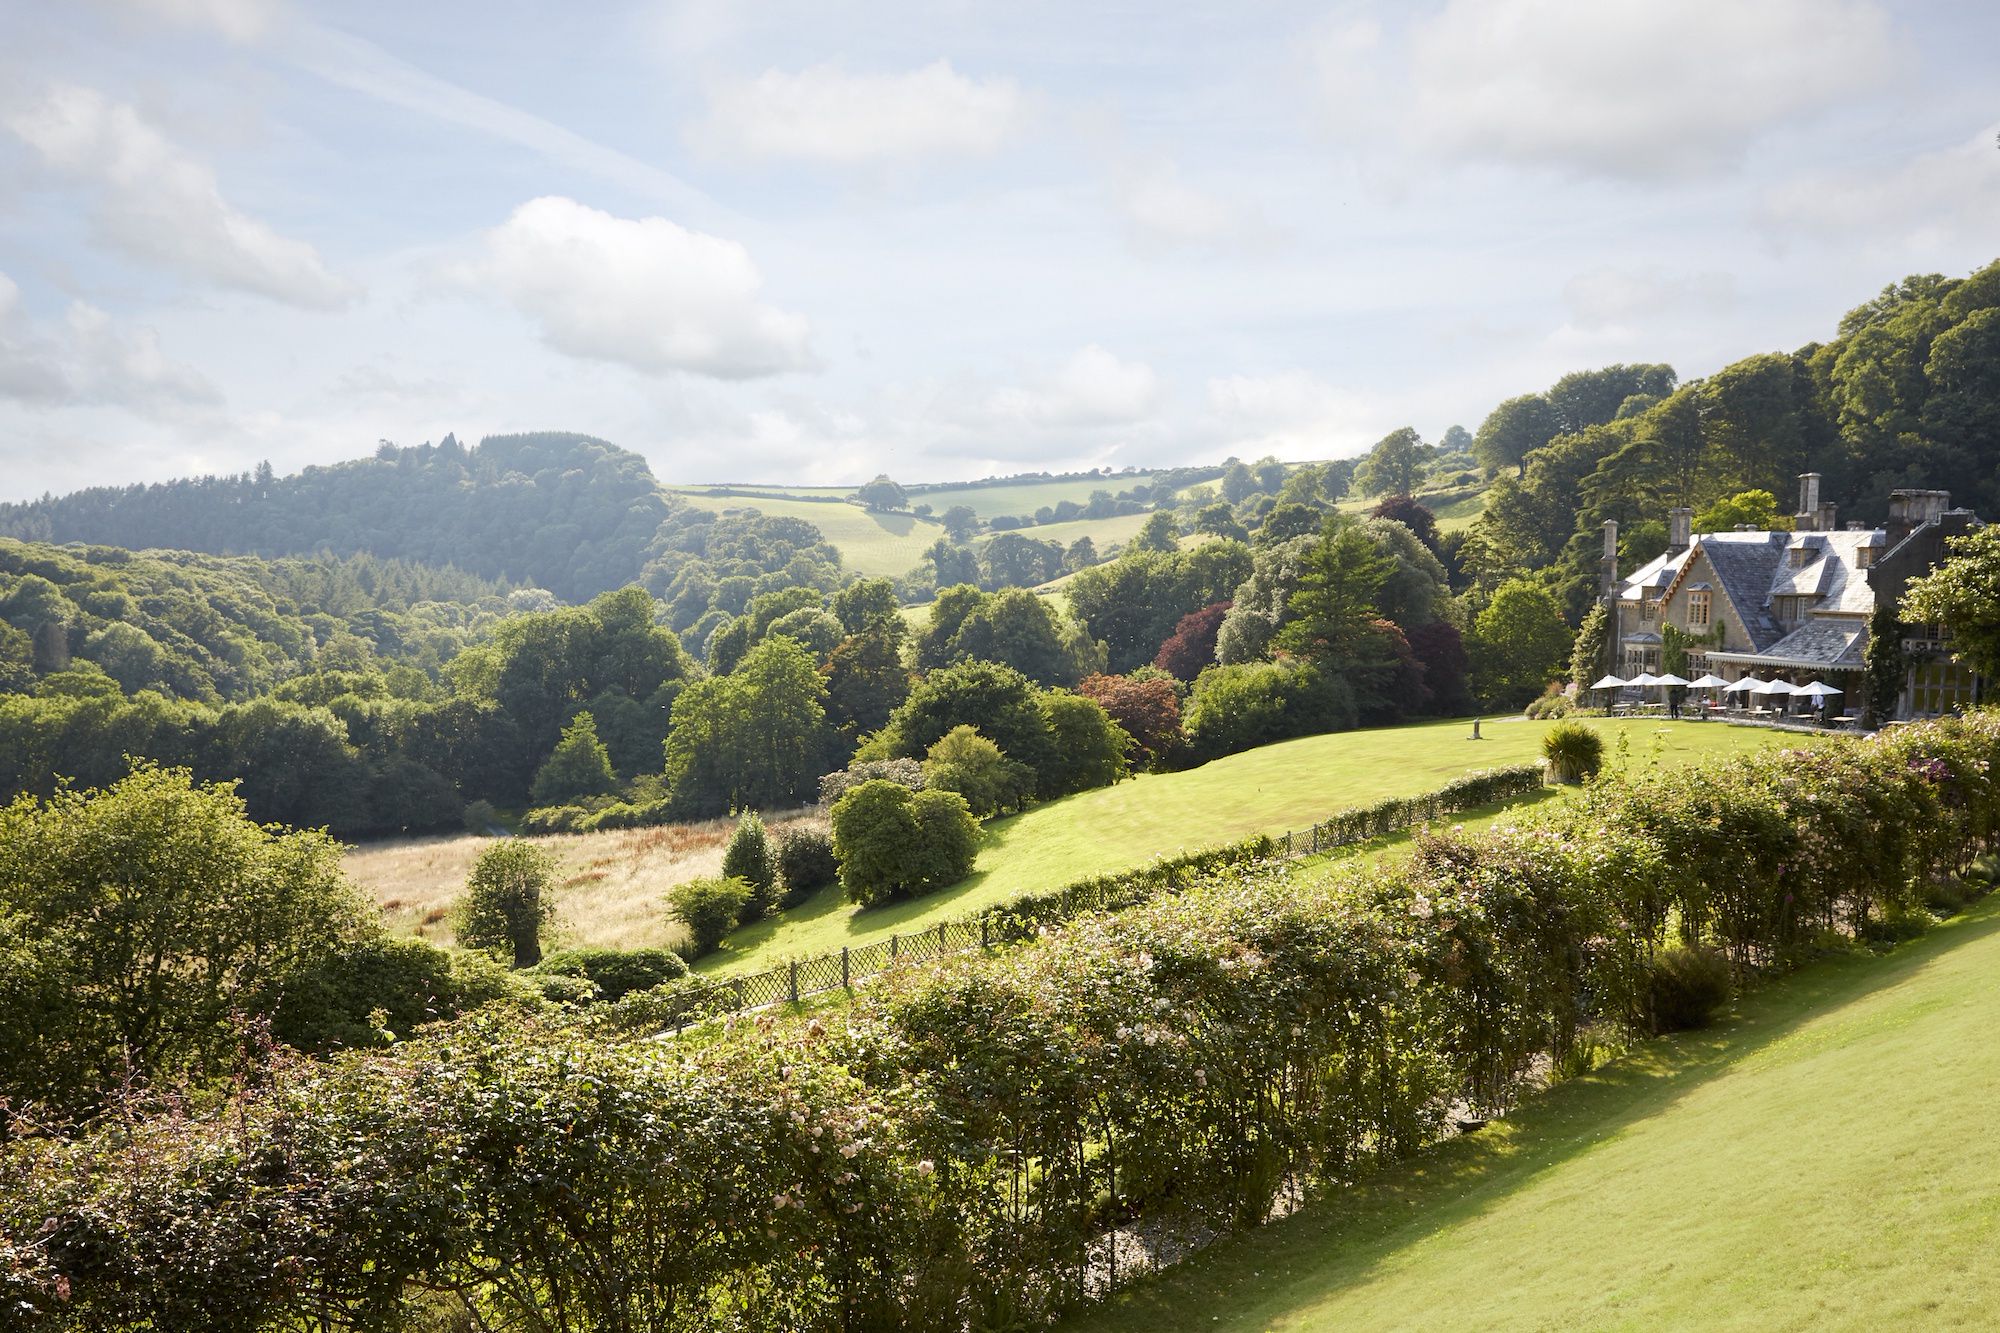 Country house hotels - best UK country houses in the UK